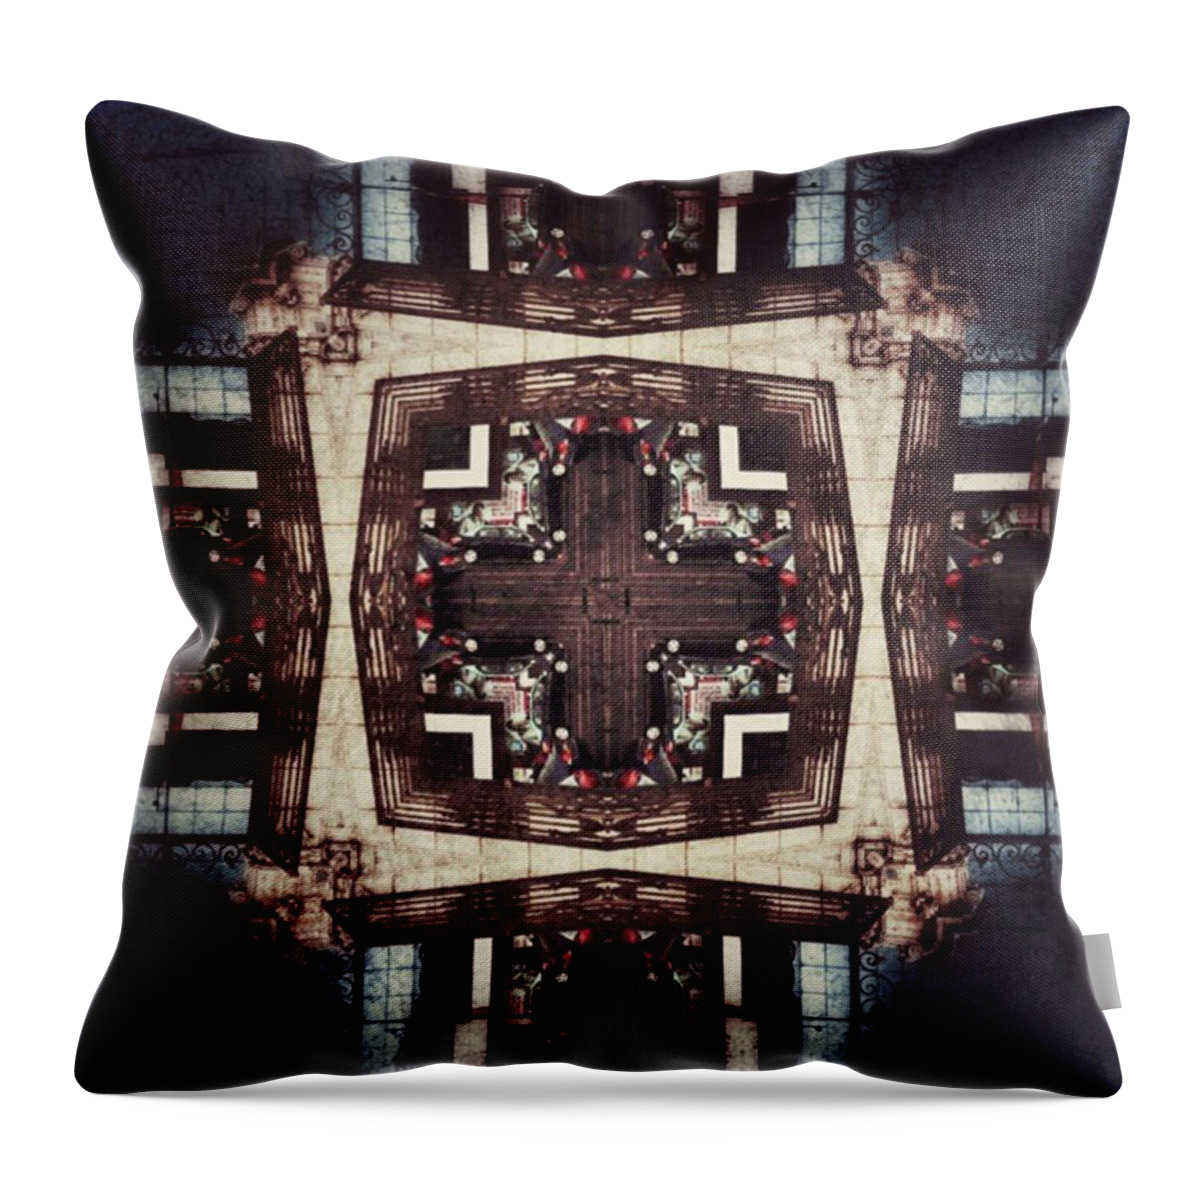 Buildings Throw Pillow featuring the photograph Real One by Jorge Ferreira